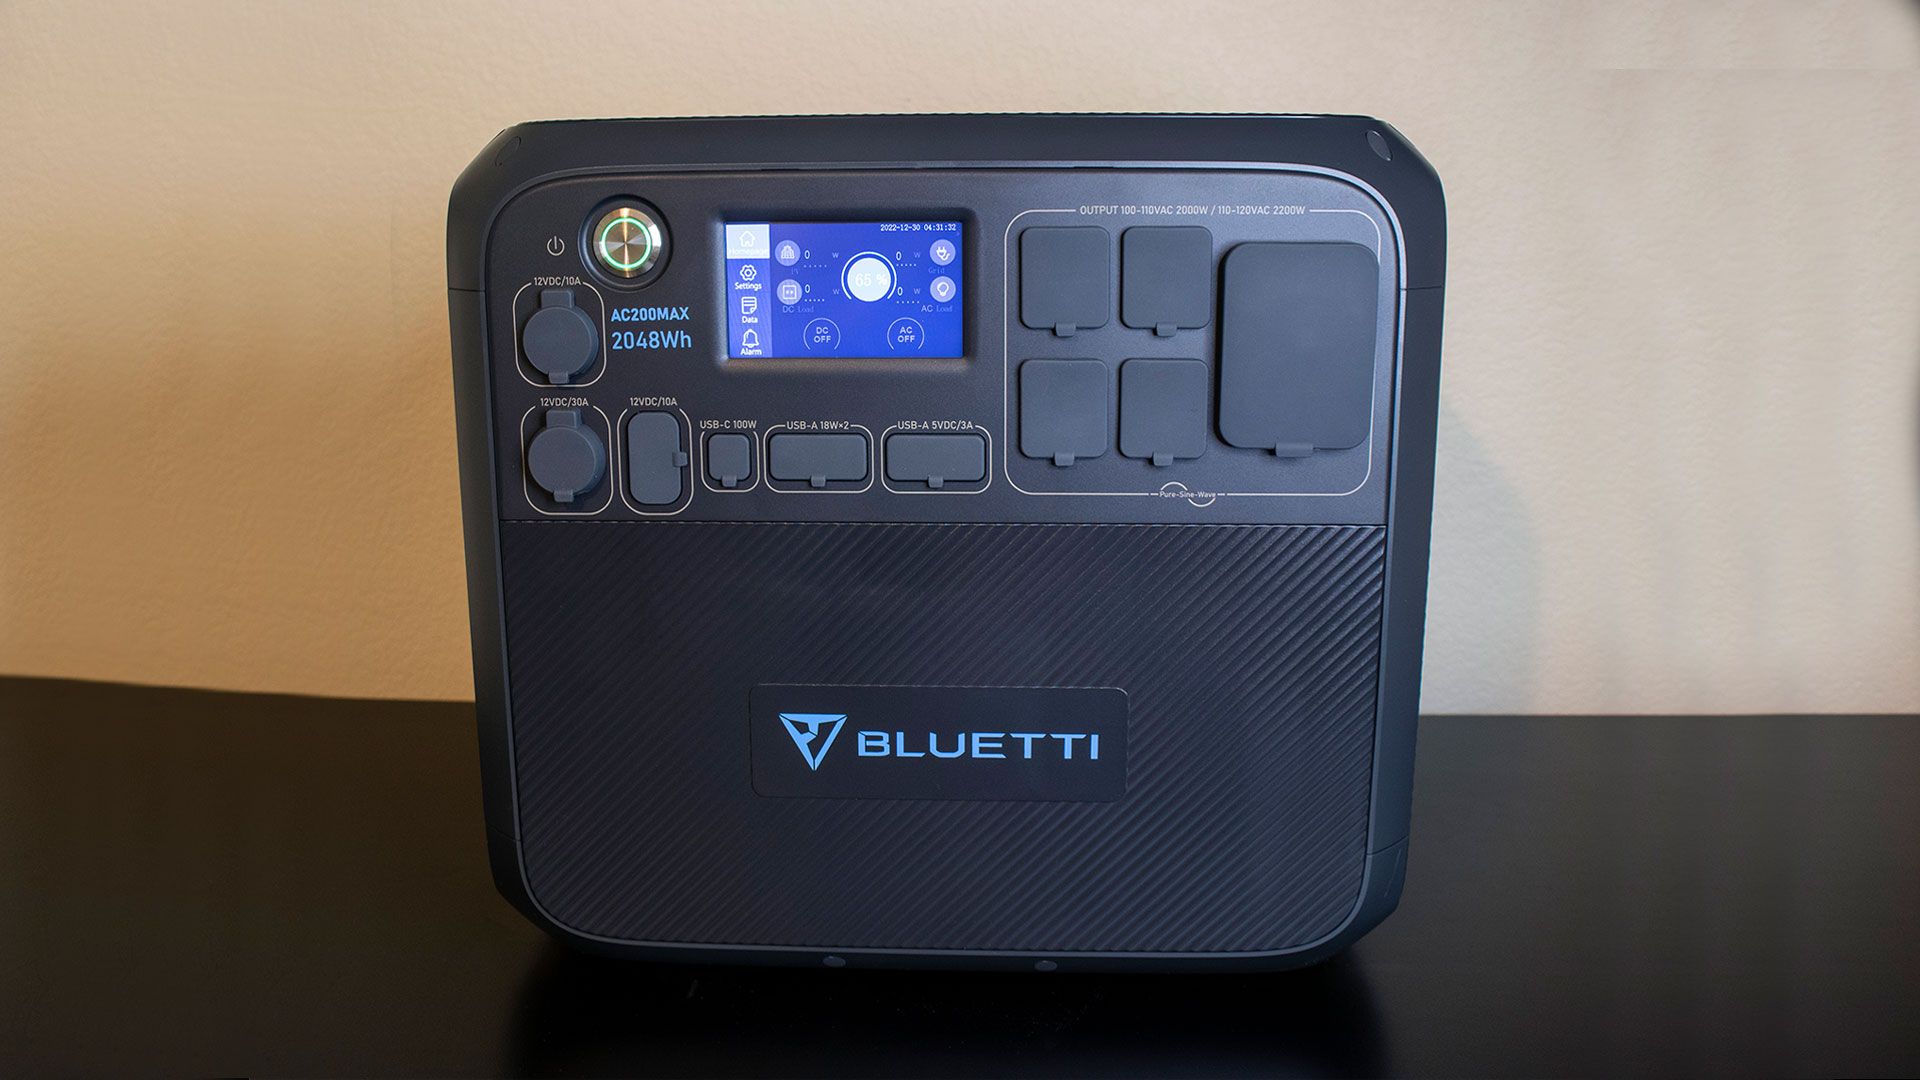 BLUETTI AC200MAX portable power station powered on